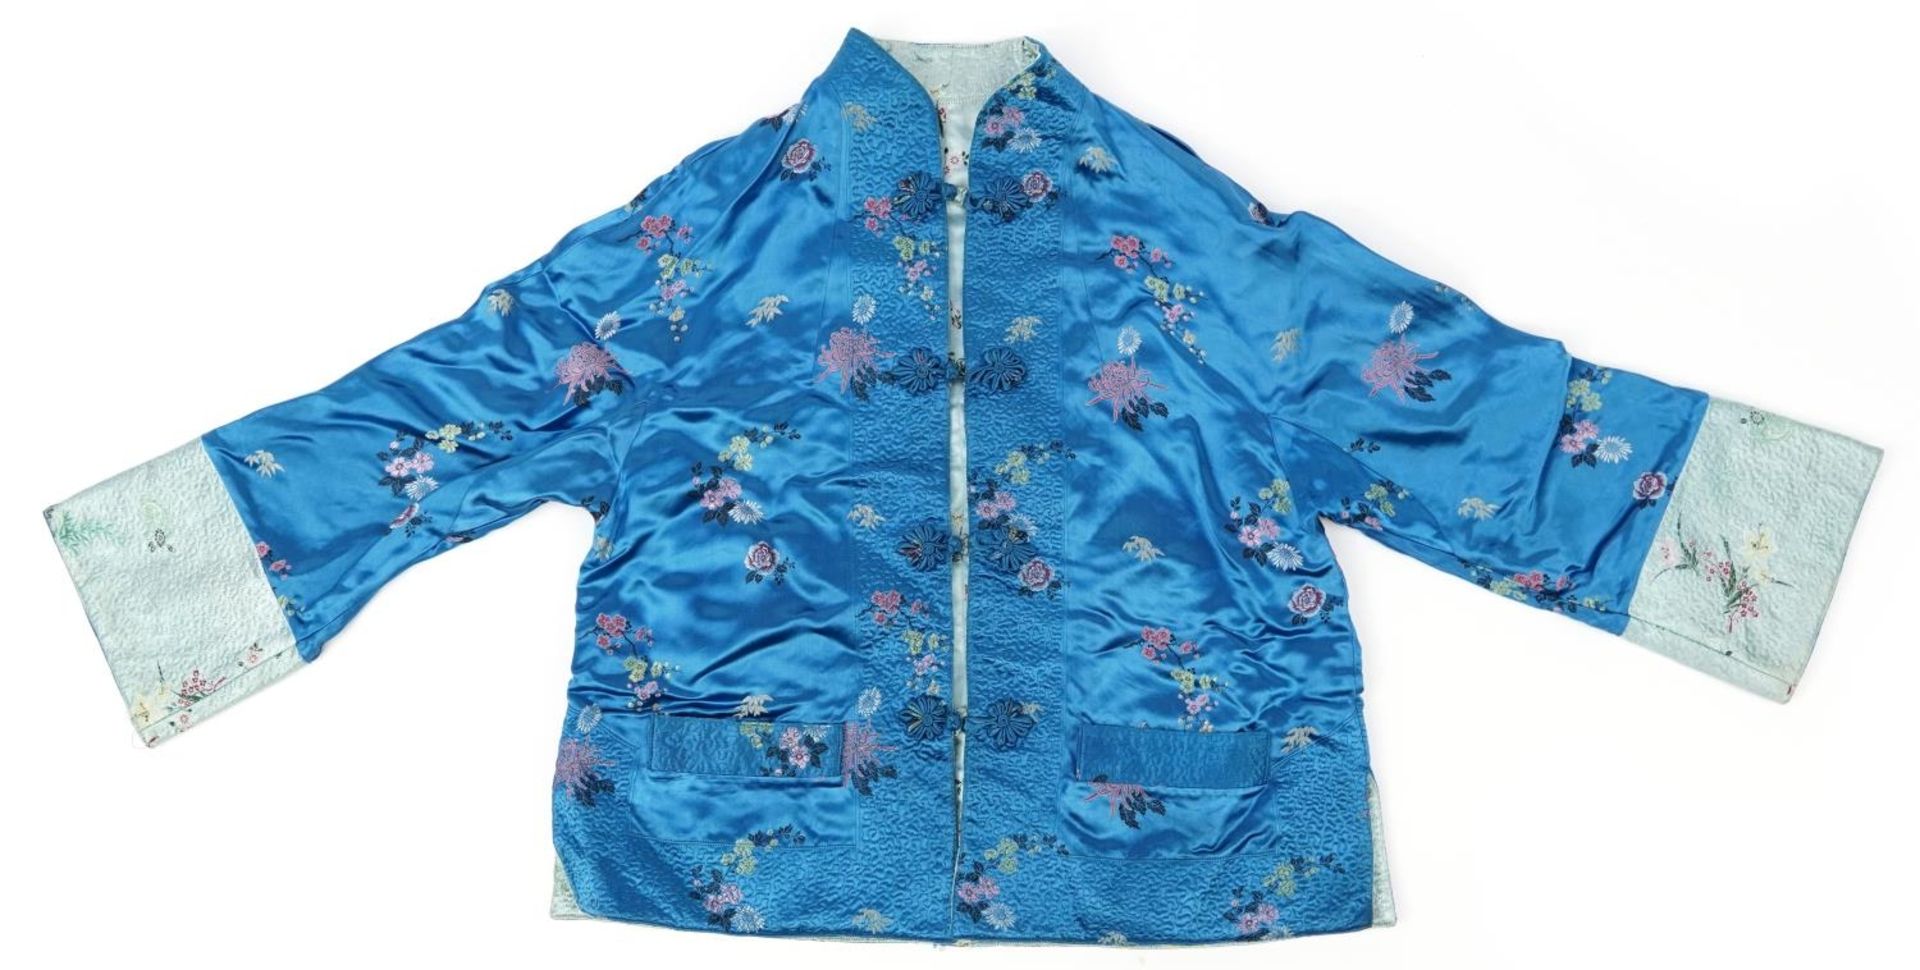 Chinese silk jacket decorated with flowers, 56cm high : For further information on this lot please